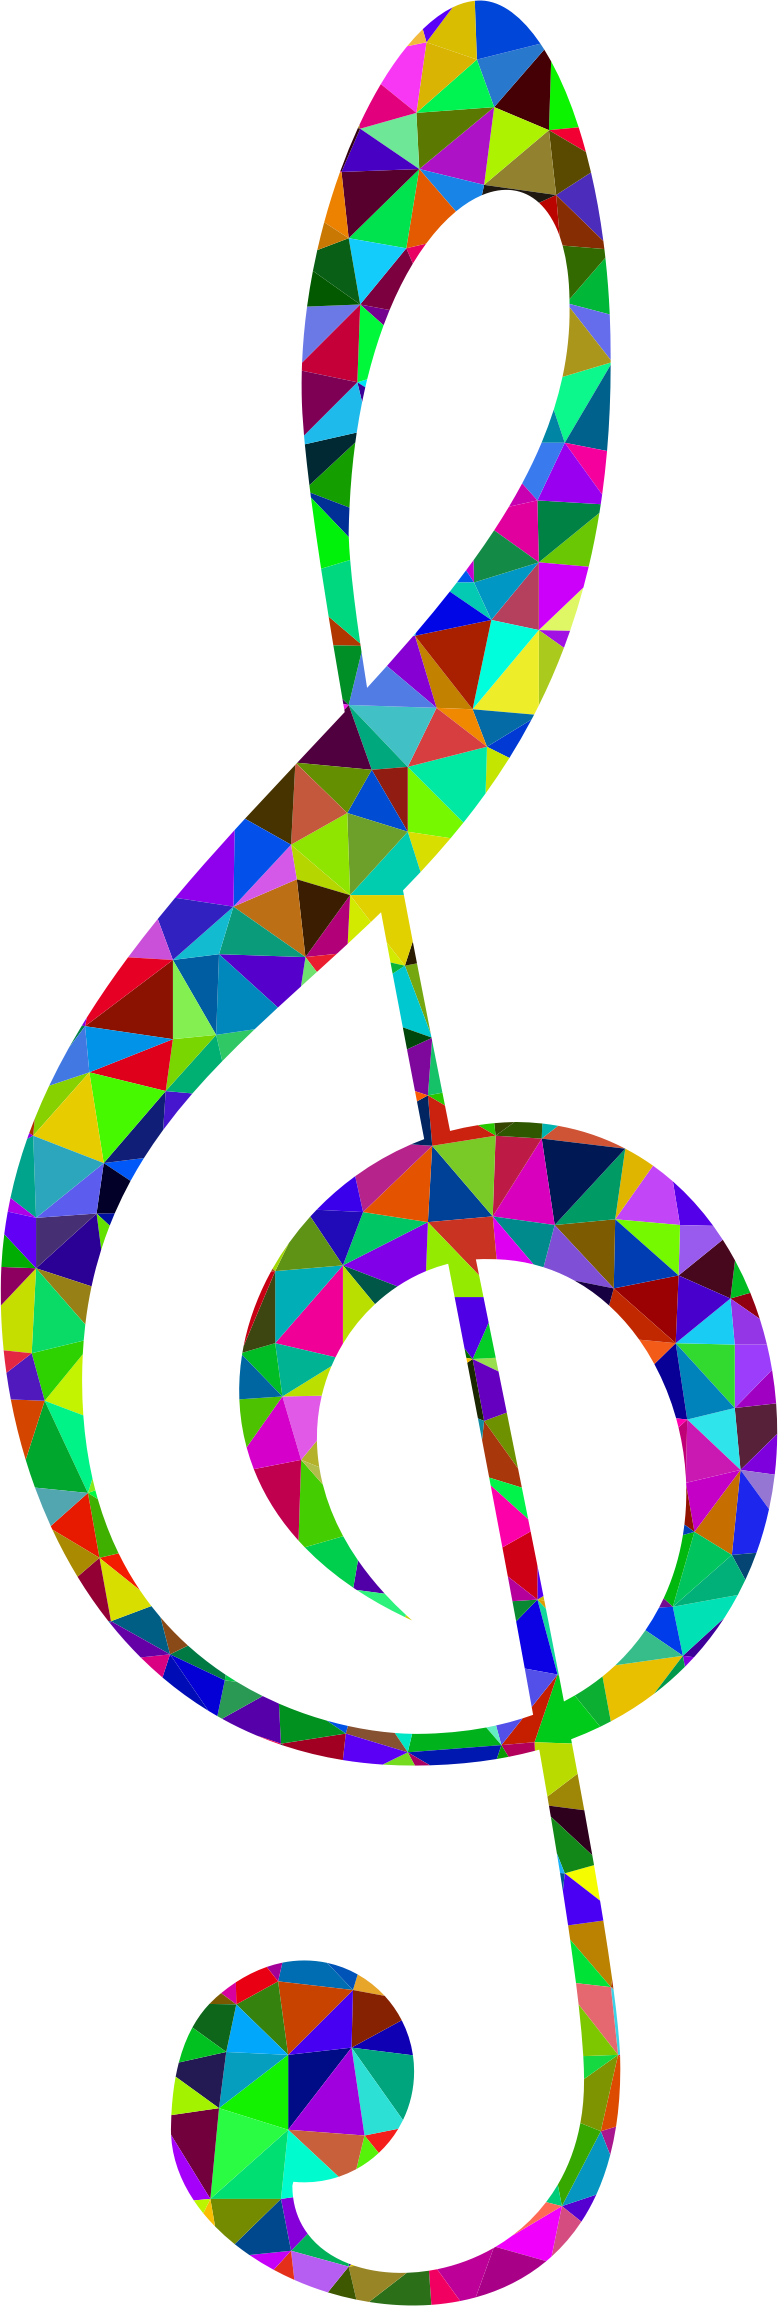 Big Image - Simple Music Notes (778x2306)